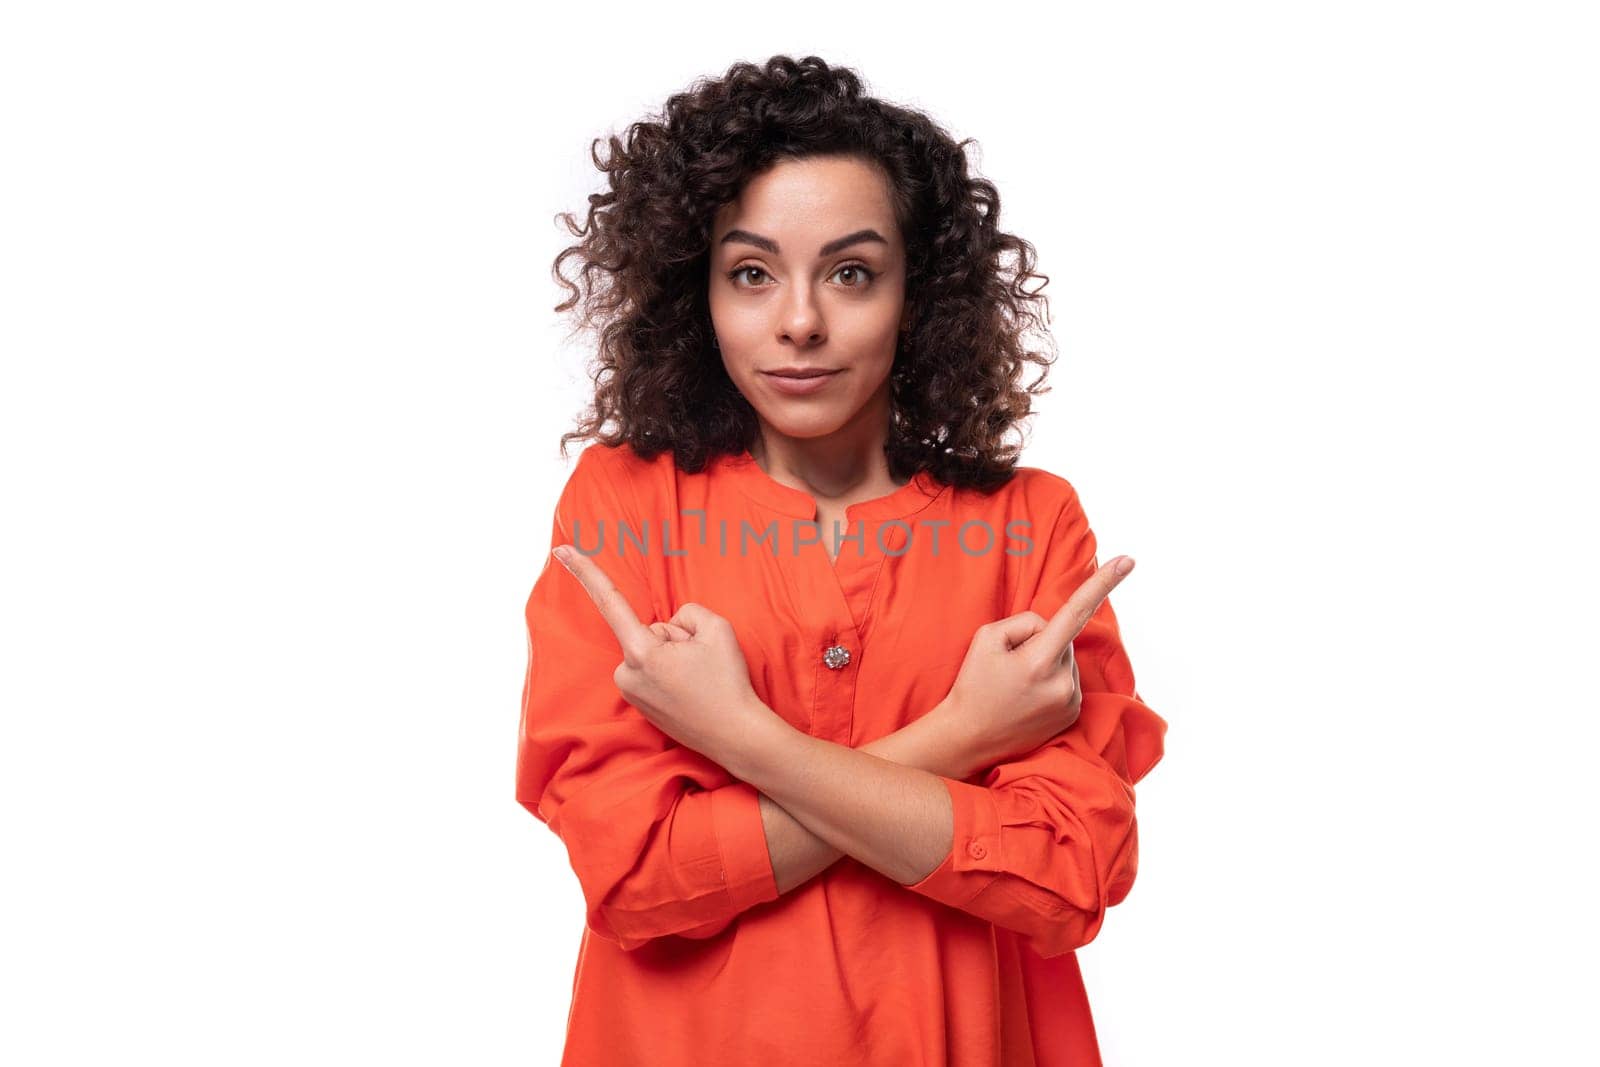 young successful caucasian business woman with curly hairstyle dressed in orange shirt.